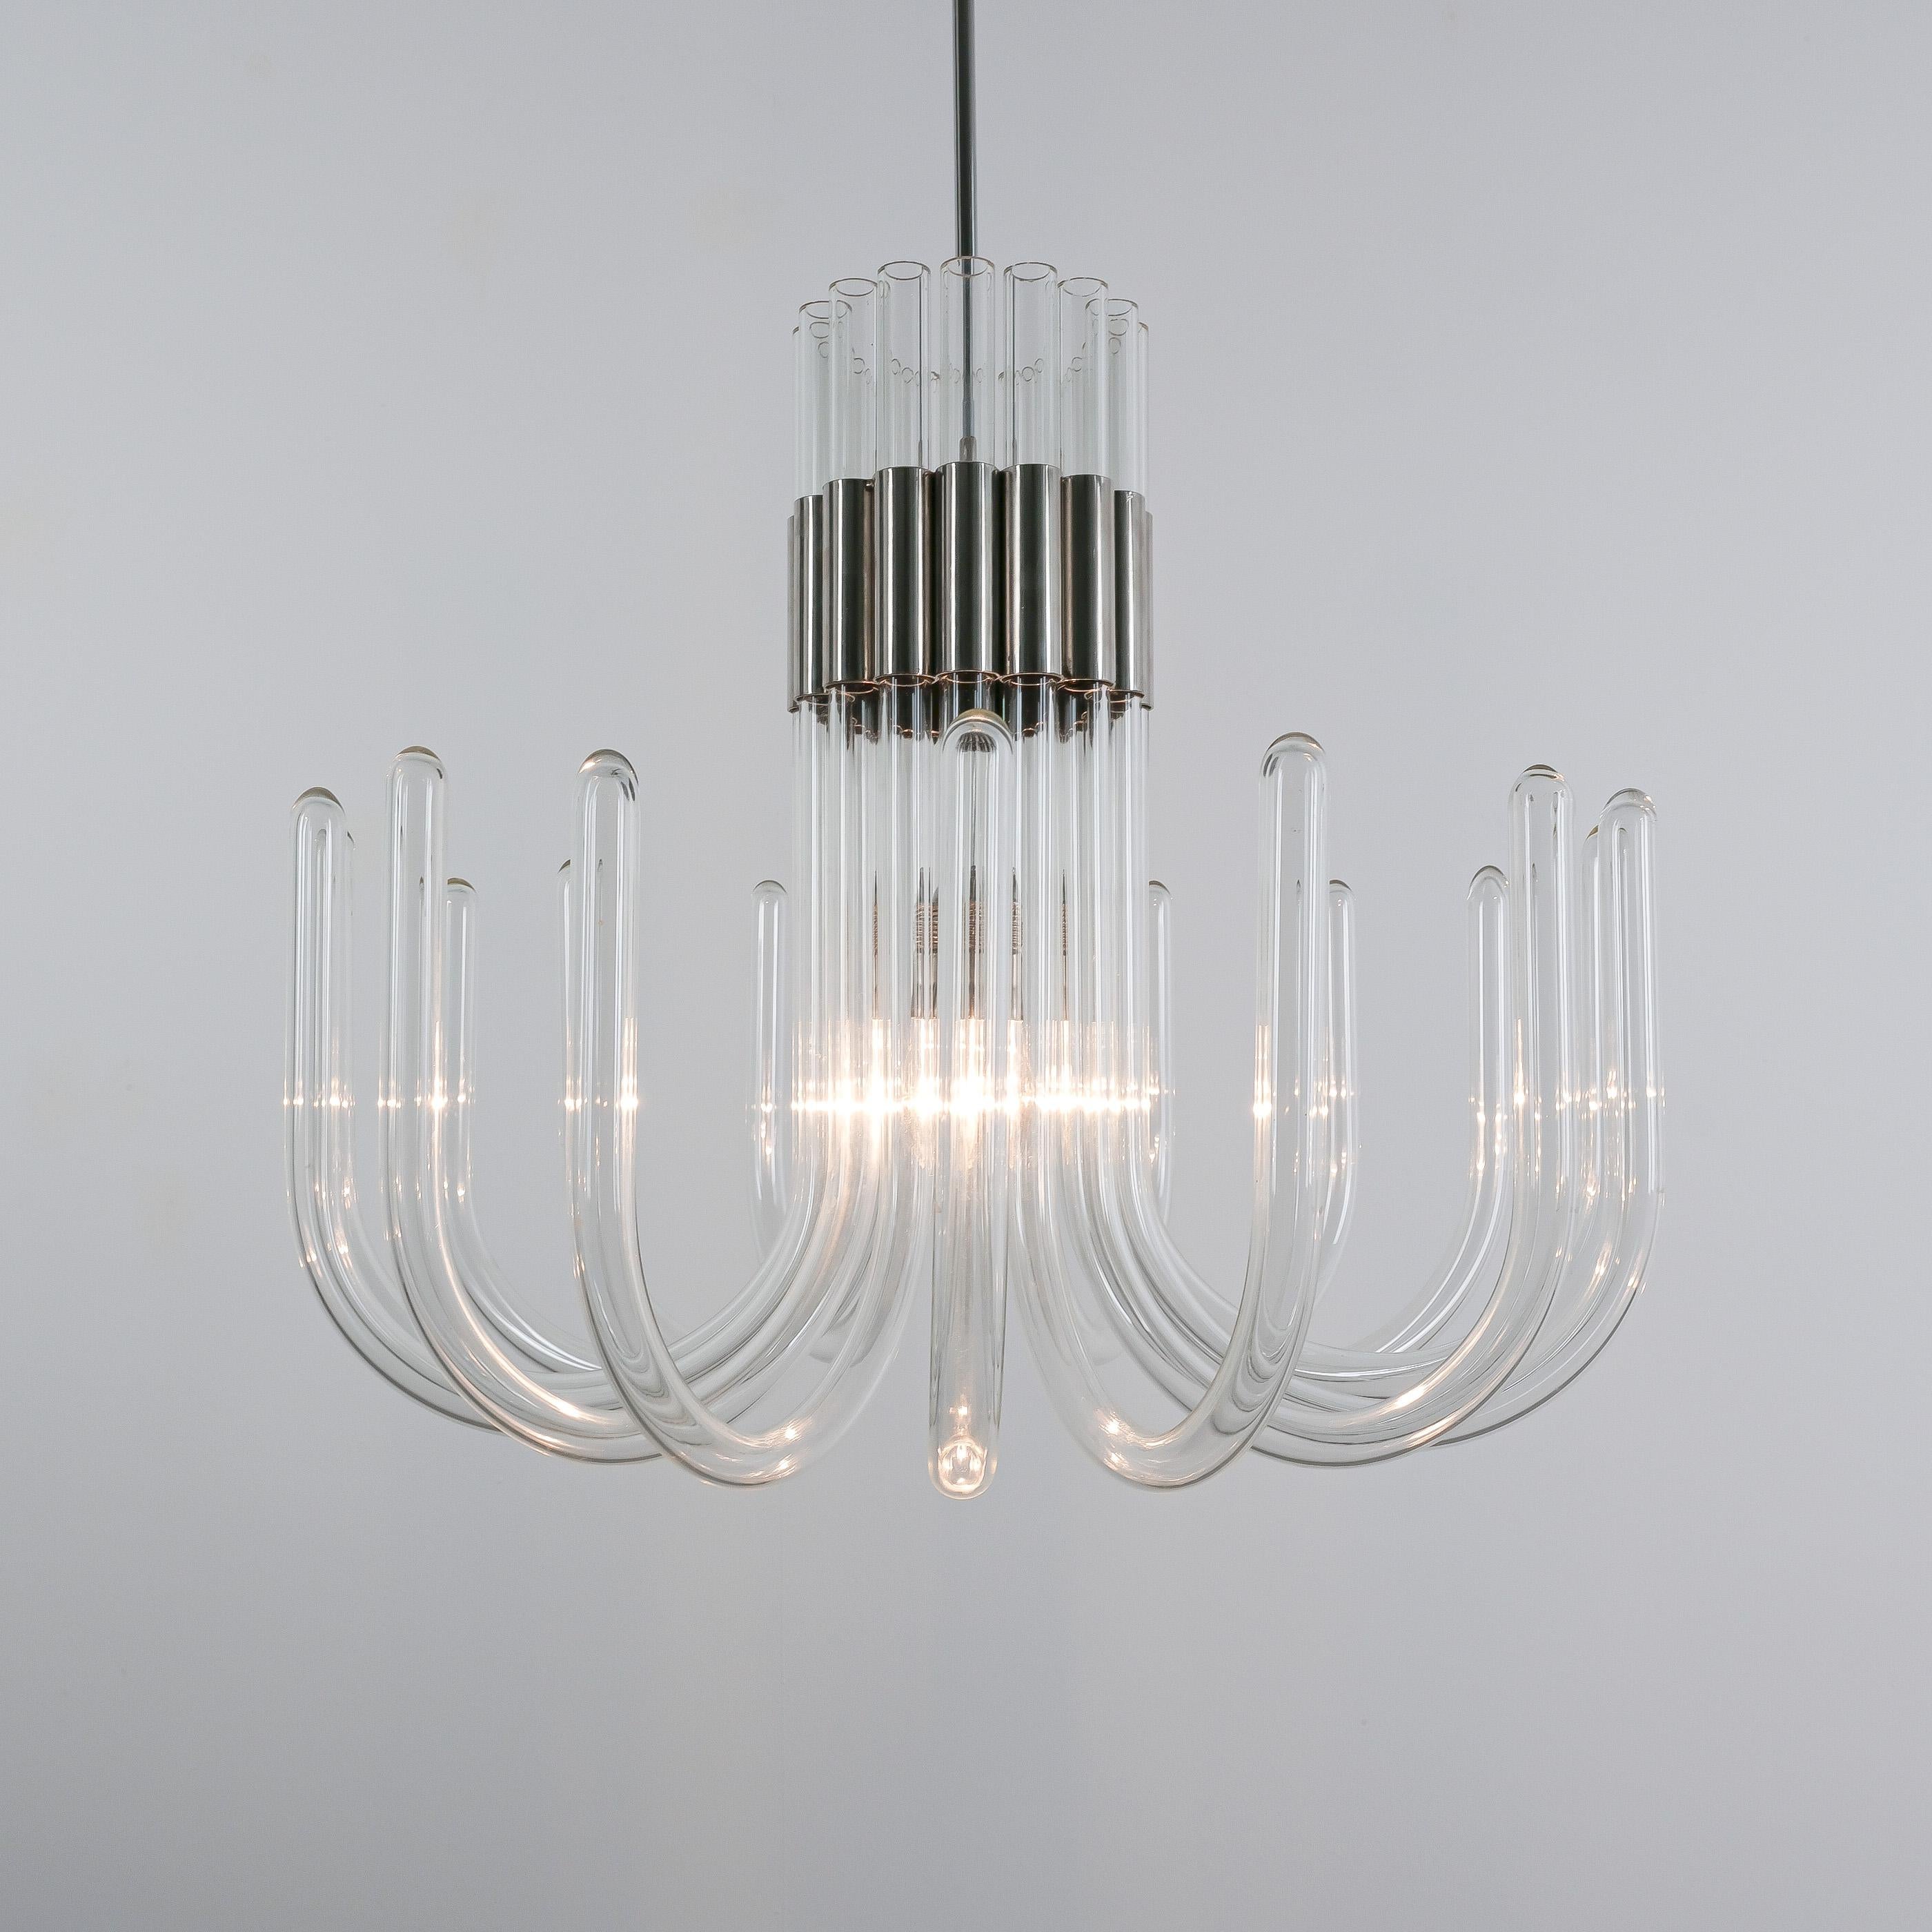 Bespoke Glass and Chrome Chandelier, Italy, circa 1970 For Sale 4